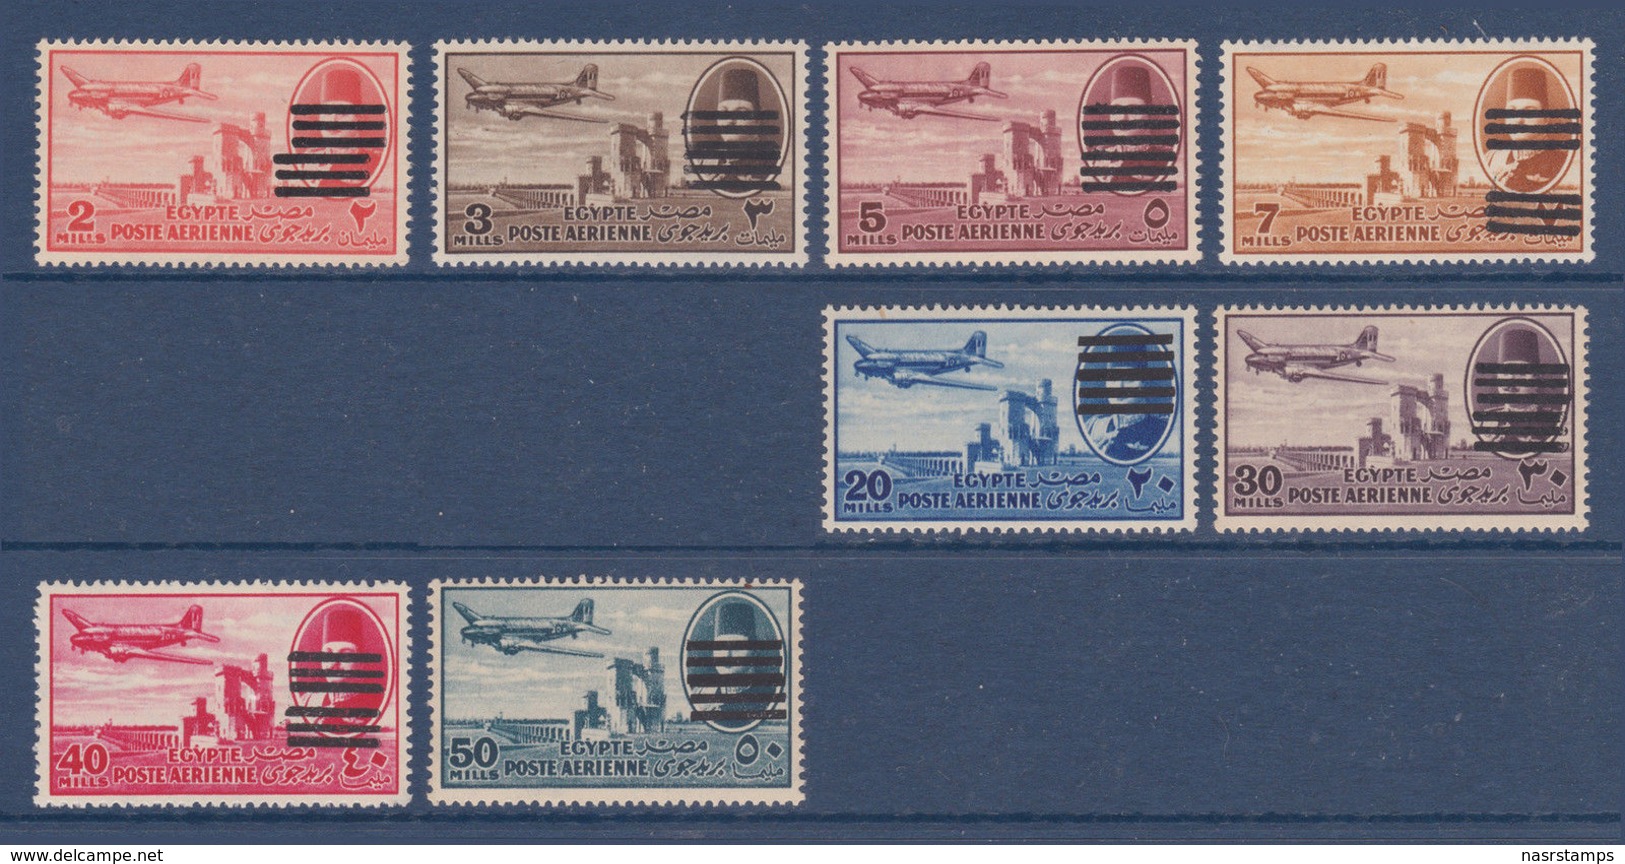 Egypt - 1953 - Rare - ( King Farouk - Air Mail - Overprinted 6 Bars ) - MNH** - Nile Post ( A54,55,56,60,61,62 & 63 ) - Unused Stamps